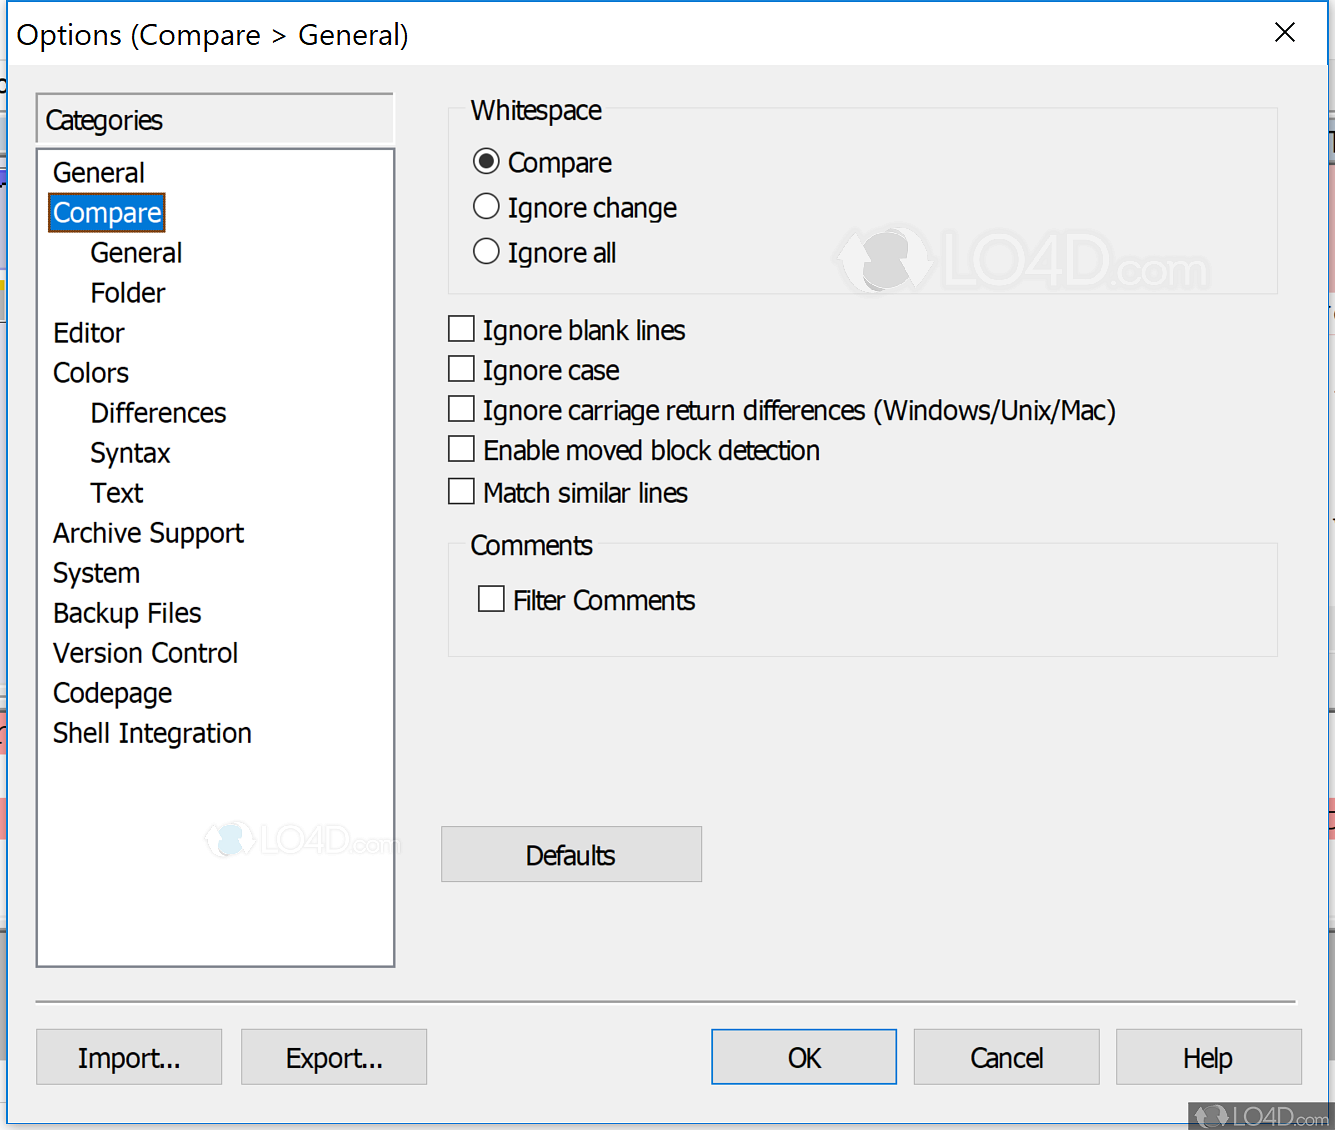 download the new WinMerge 2.16.33